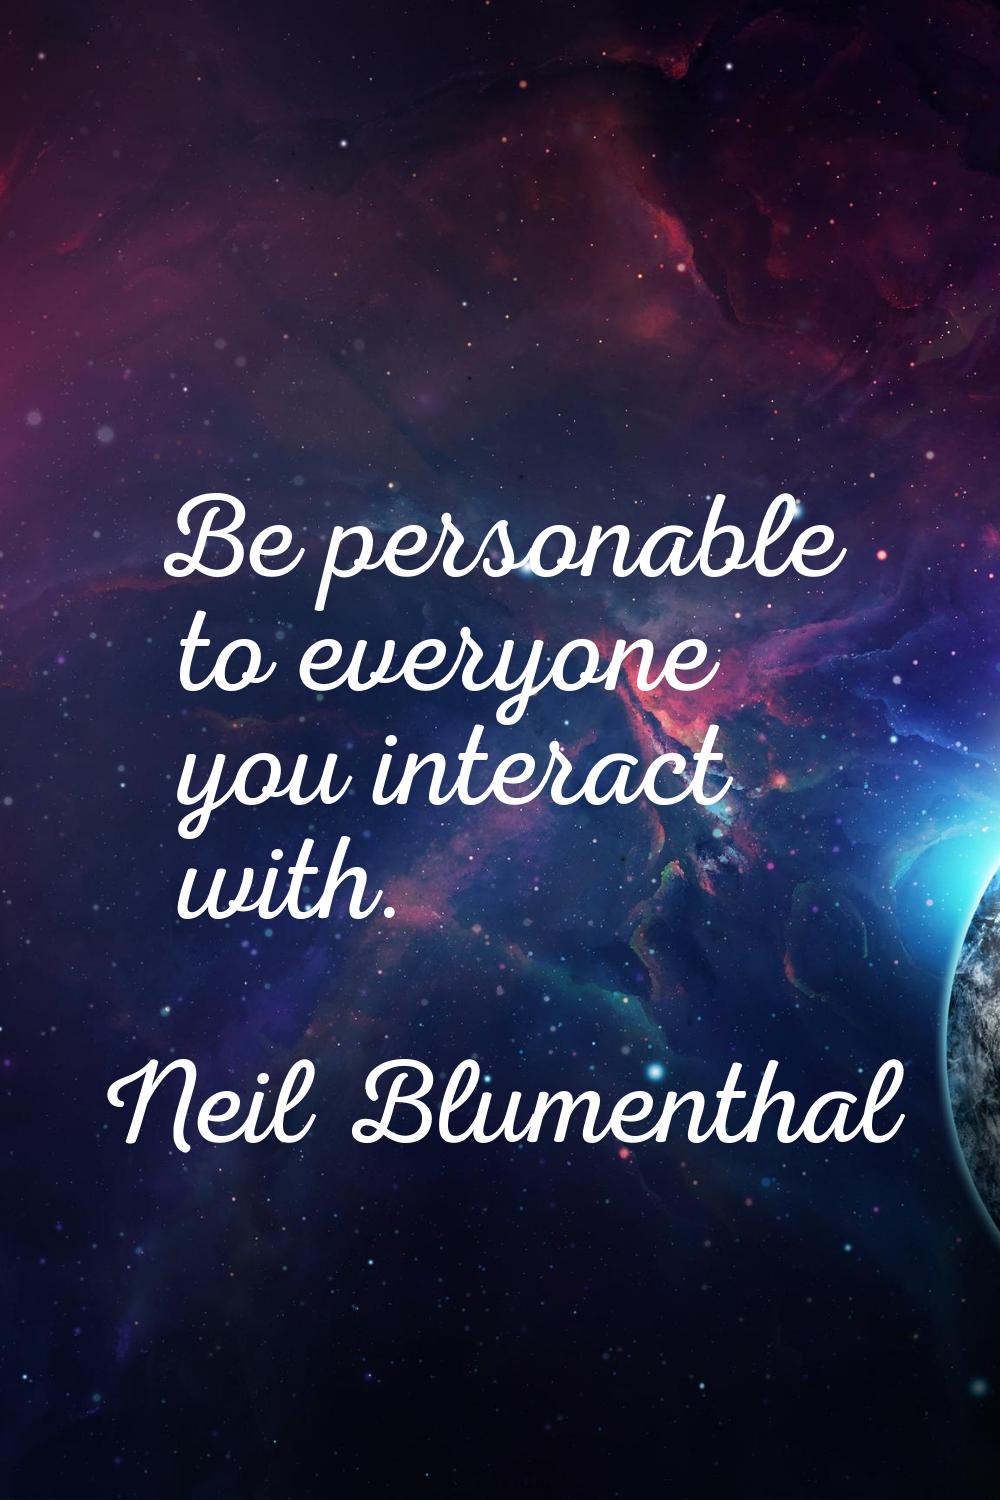 Be personable to everyone you interact with.